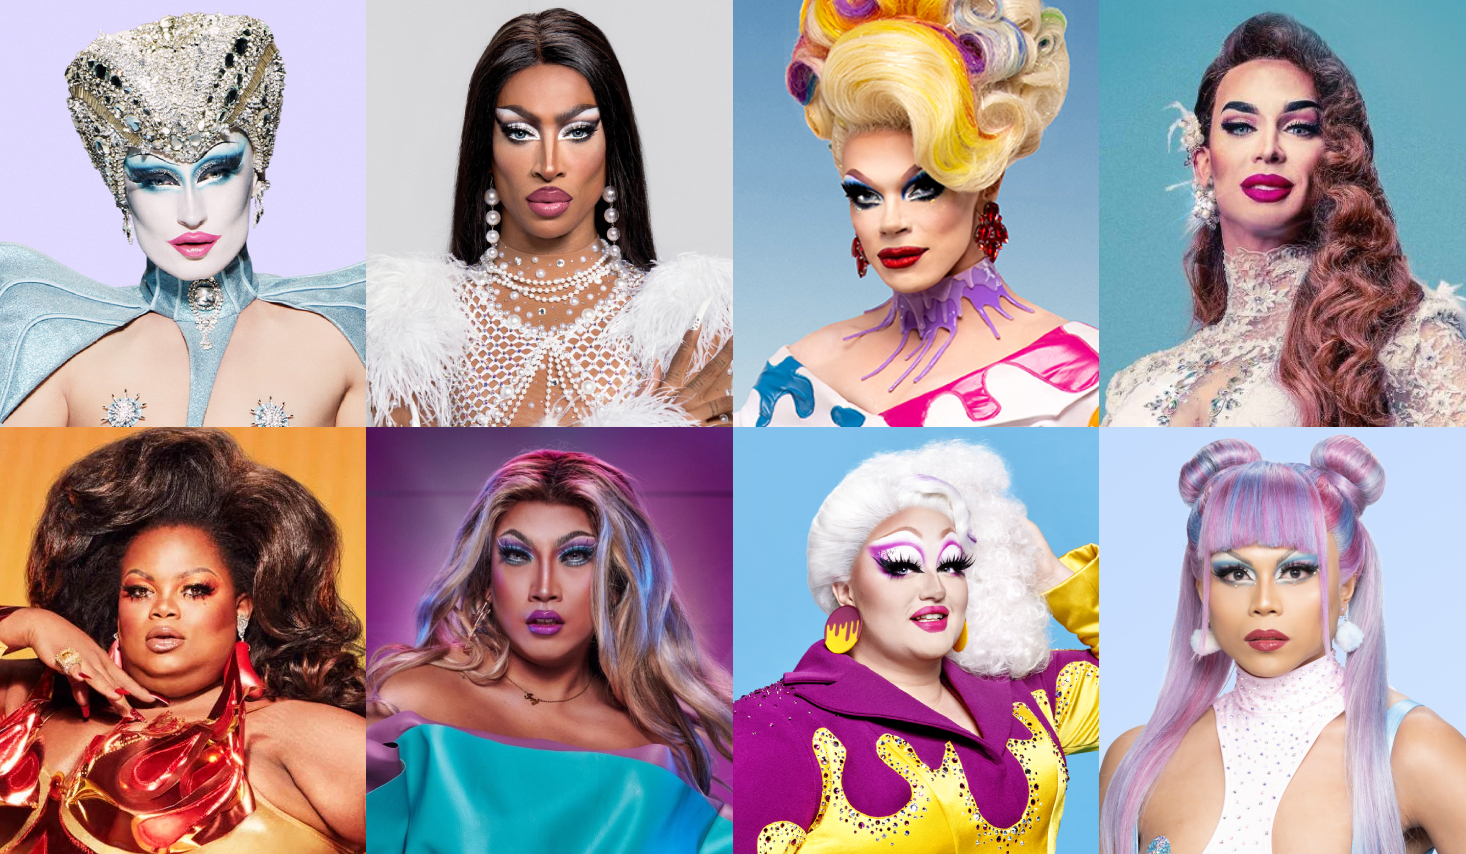 Here’s your guide to the RuPaul’s Drag Race franchise in 2021.